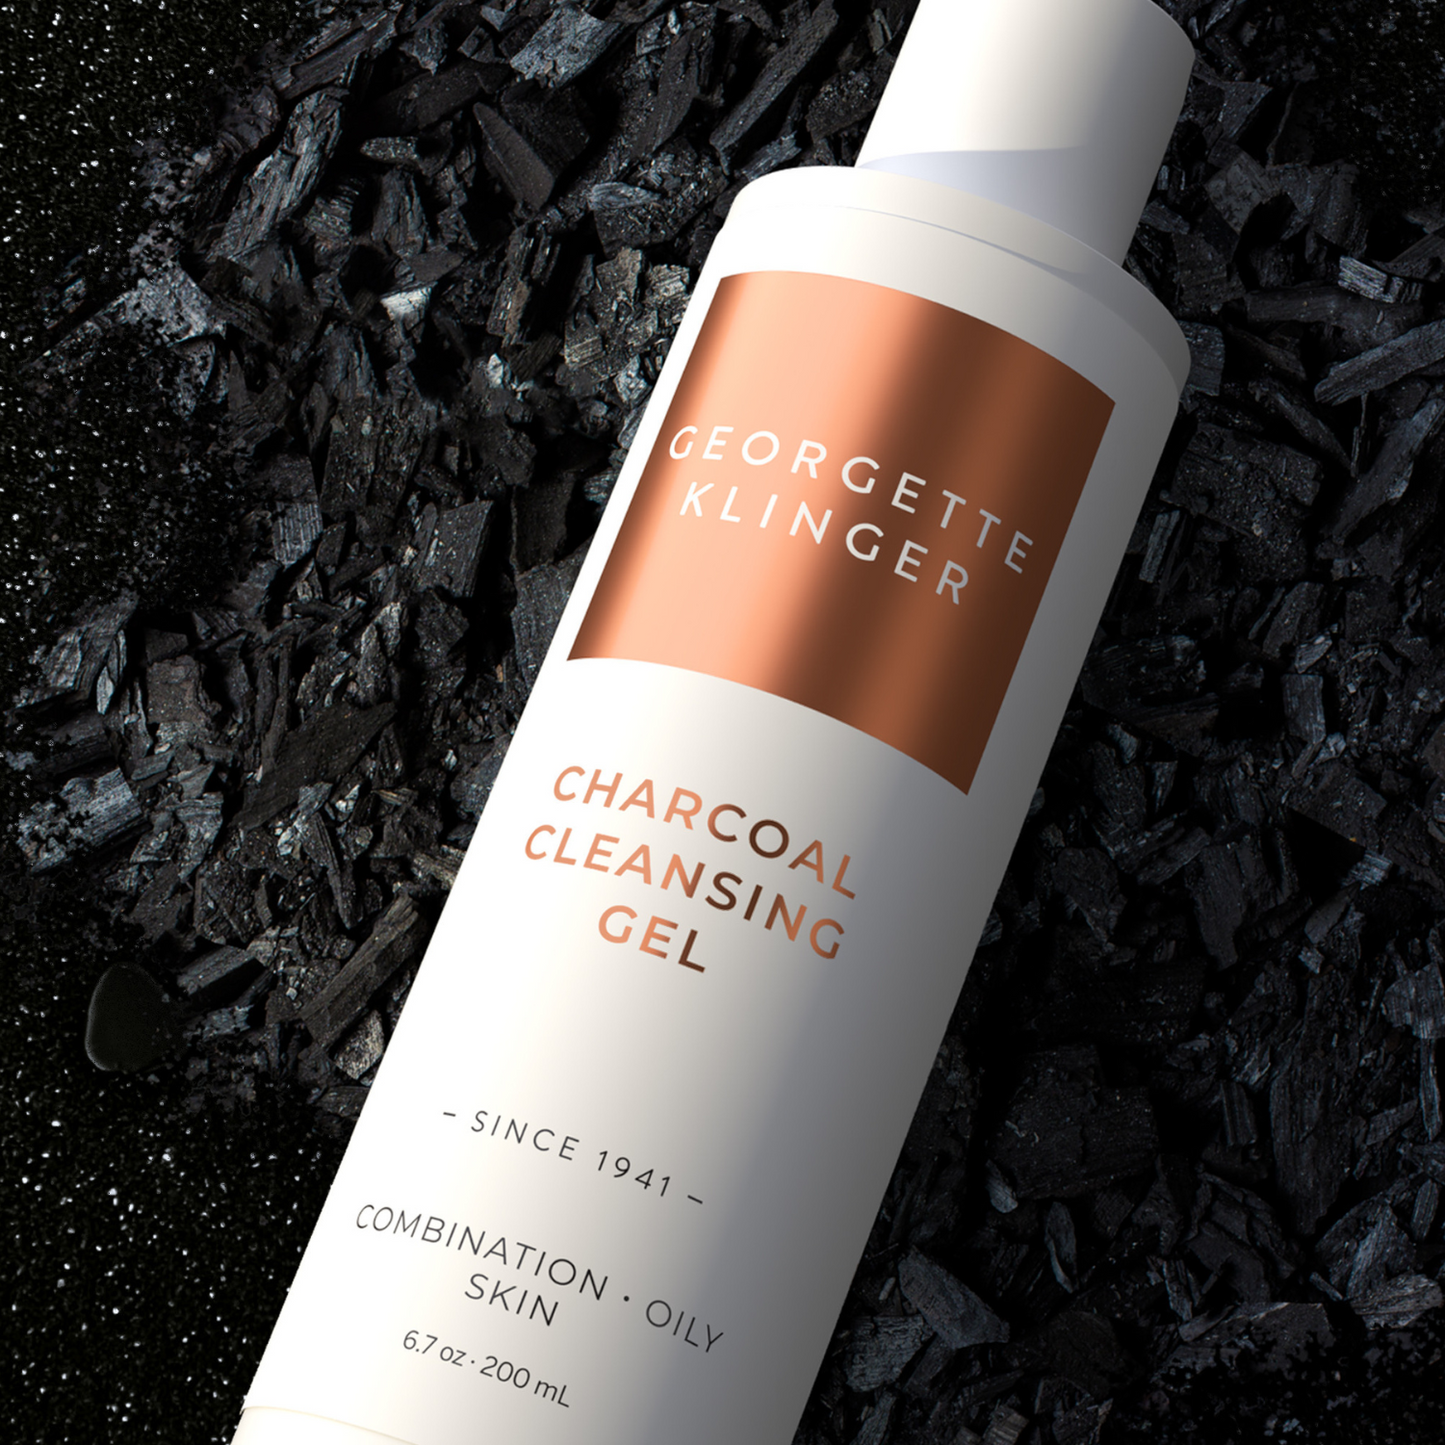 Charcoal Cleansing Gel